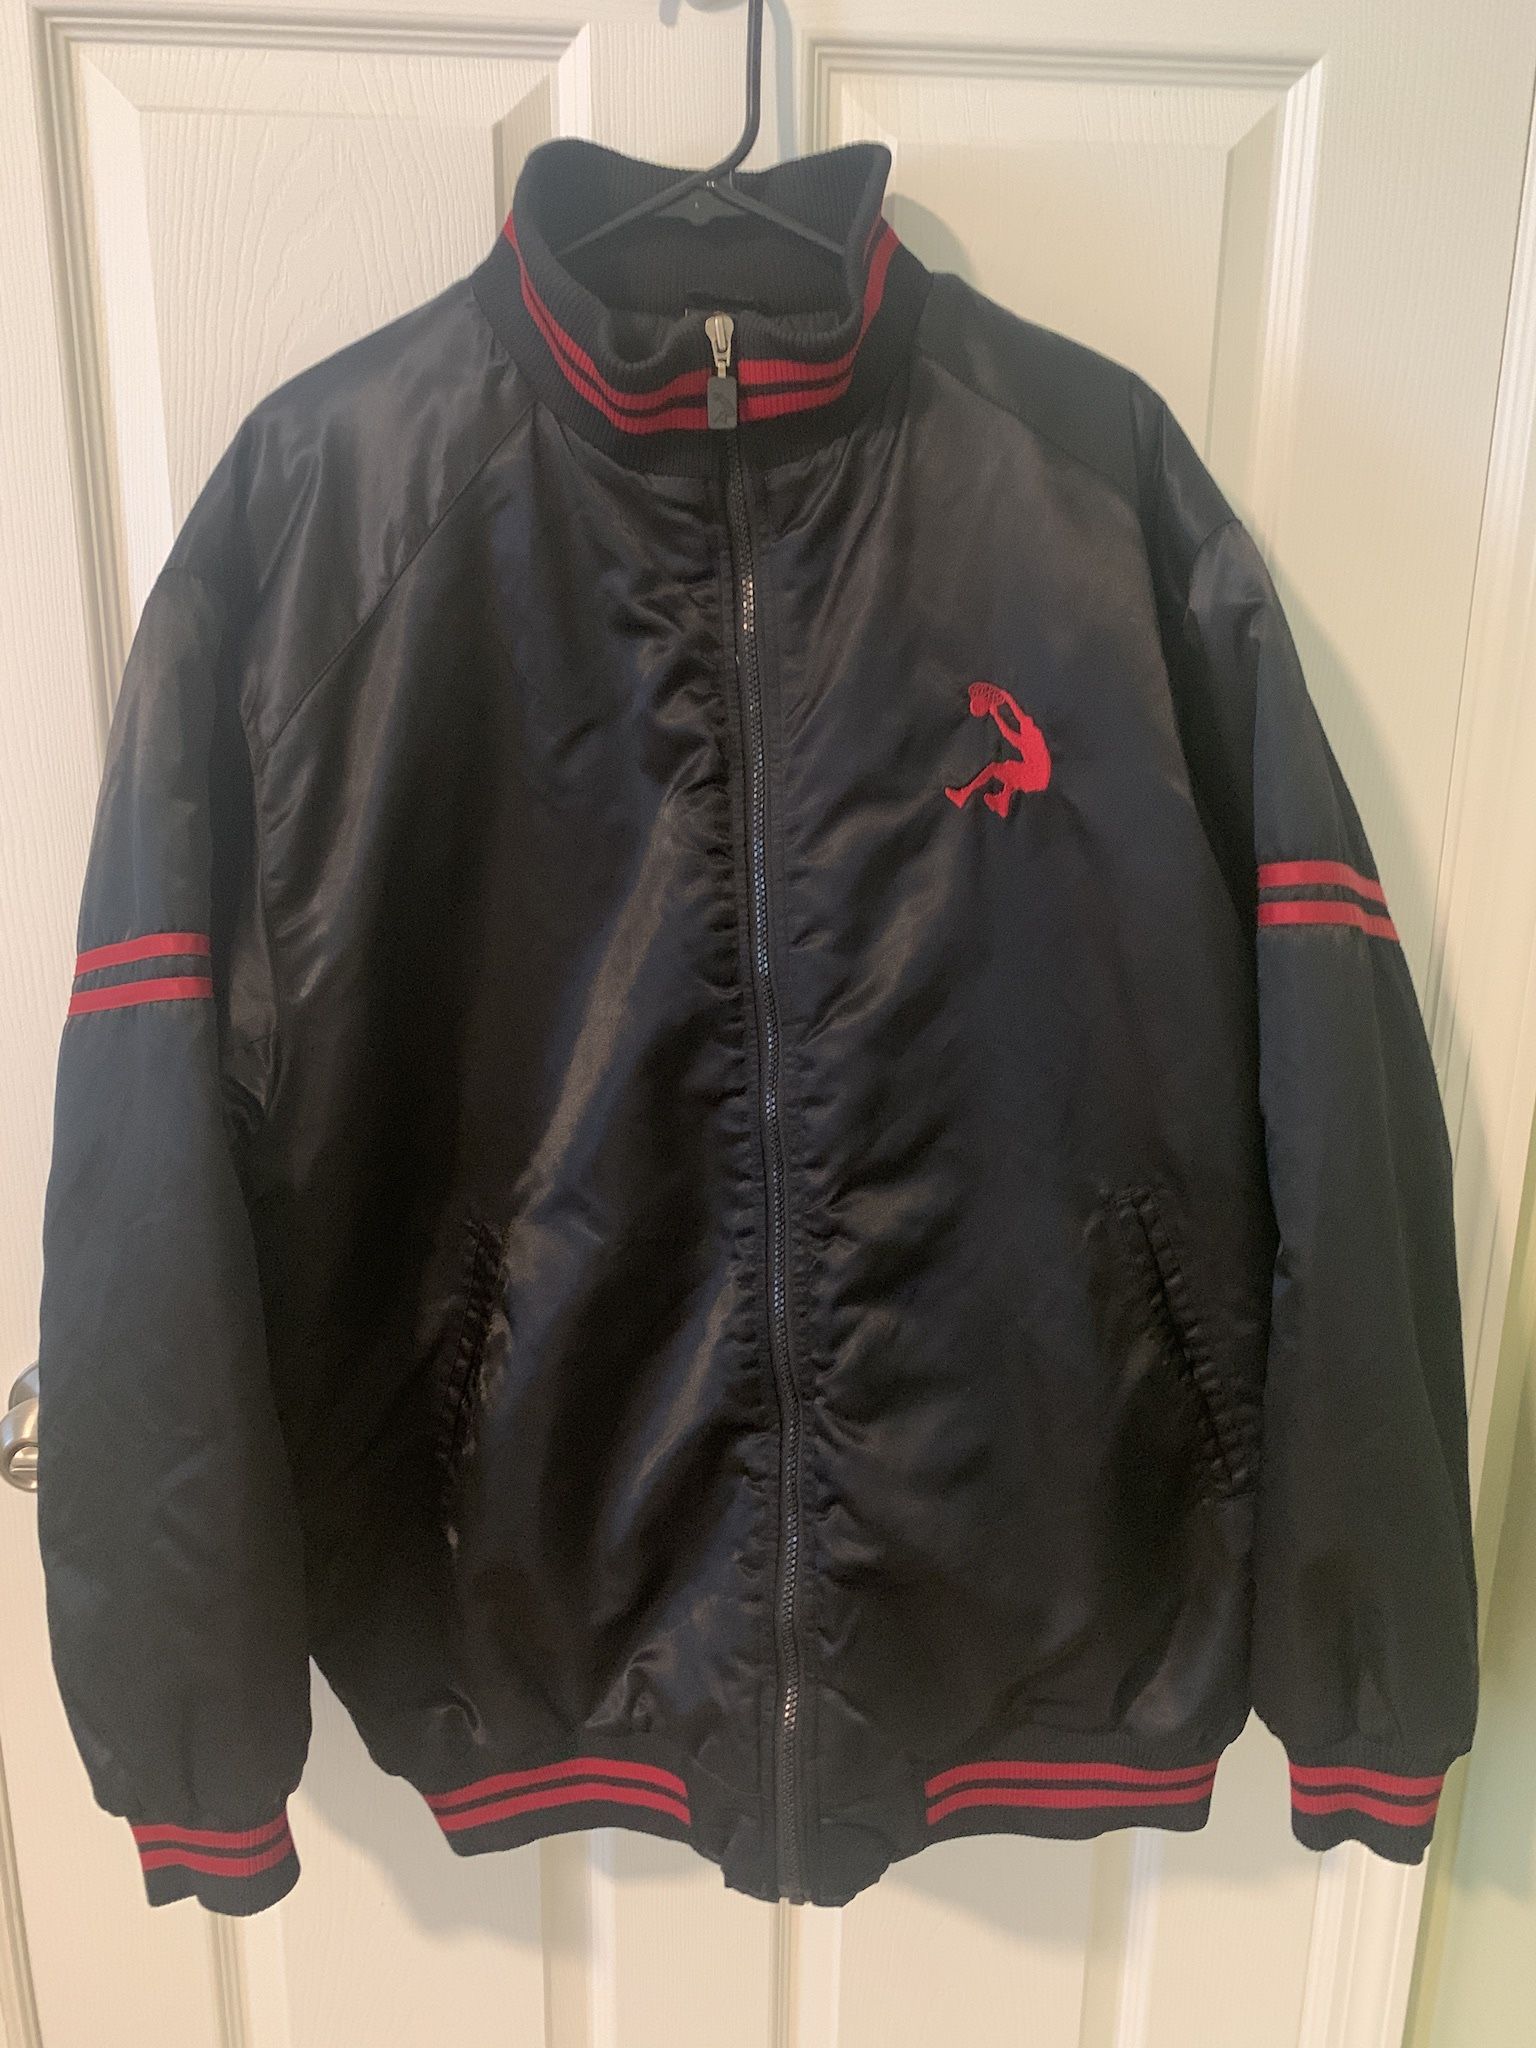 Shaquille  O’Neal Legacy Bomber  Winter Jacket  Satin  Color: Black/Red  Mens Sz L  Basketball